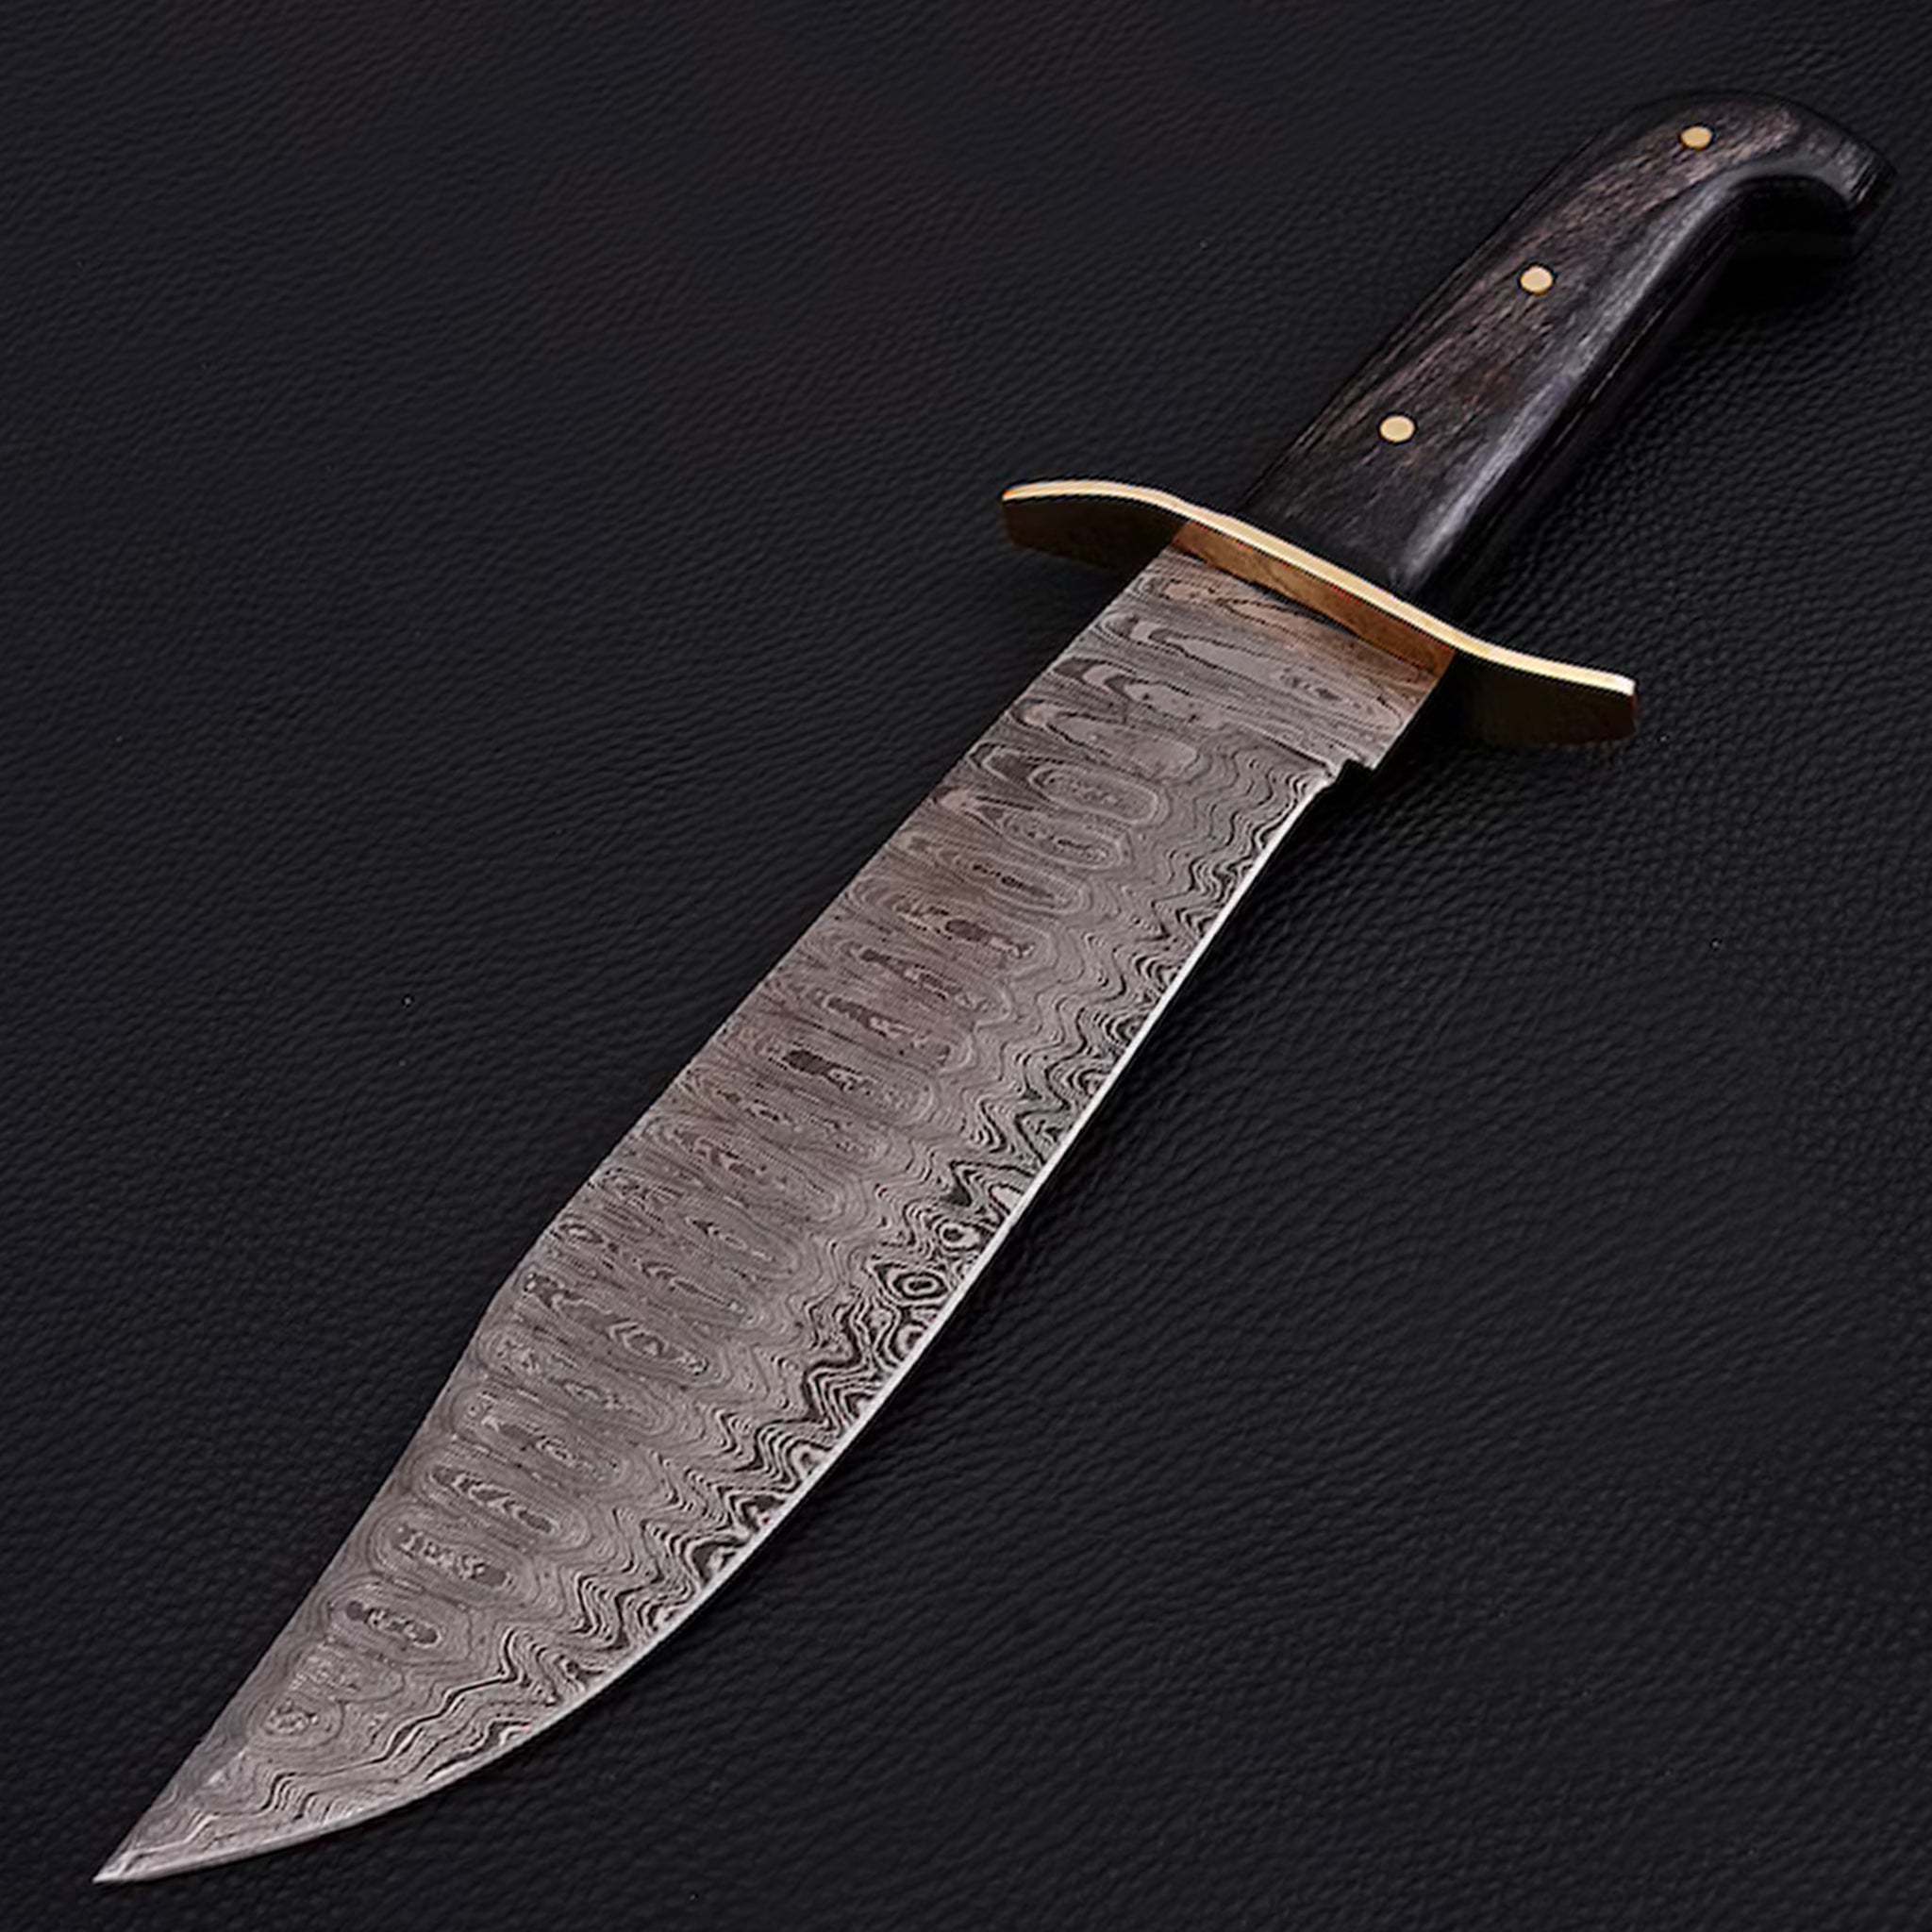 Bowie Knife Full Tang Damascus Steel Hunting Knife DK-007 – The